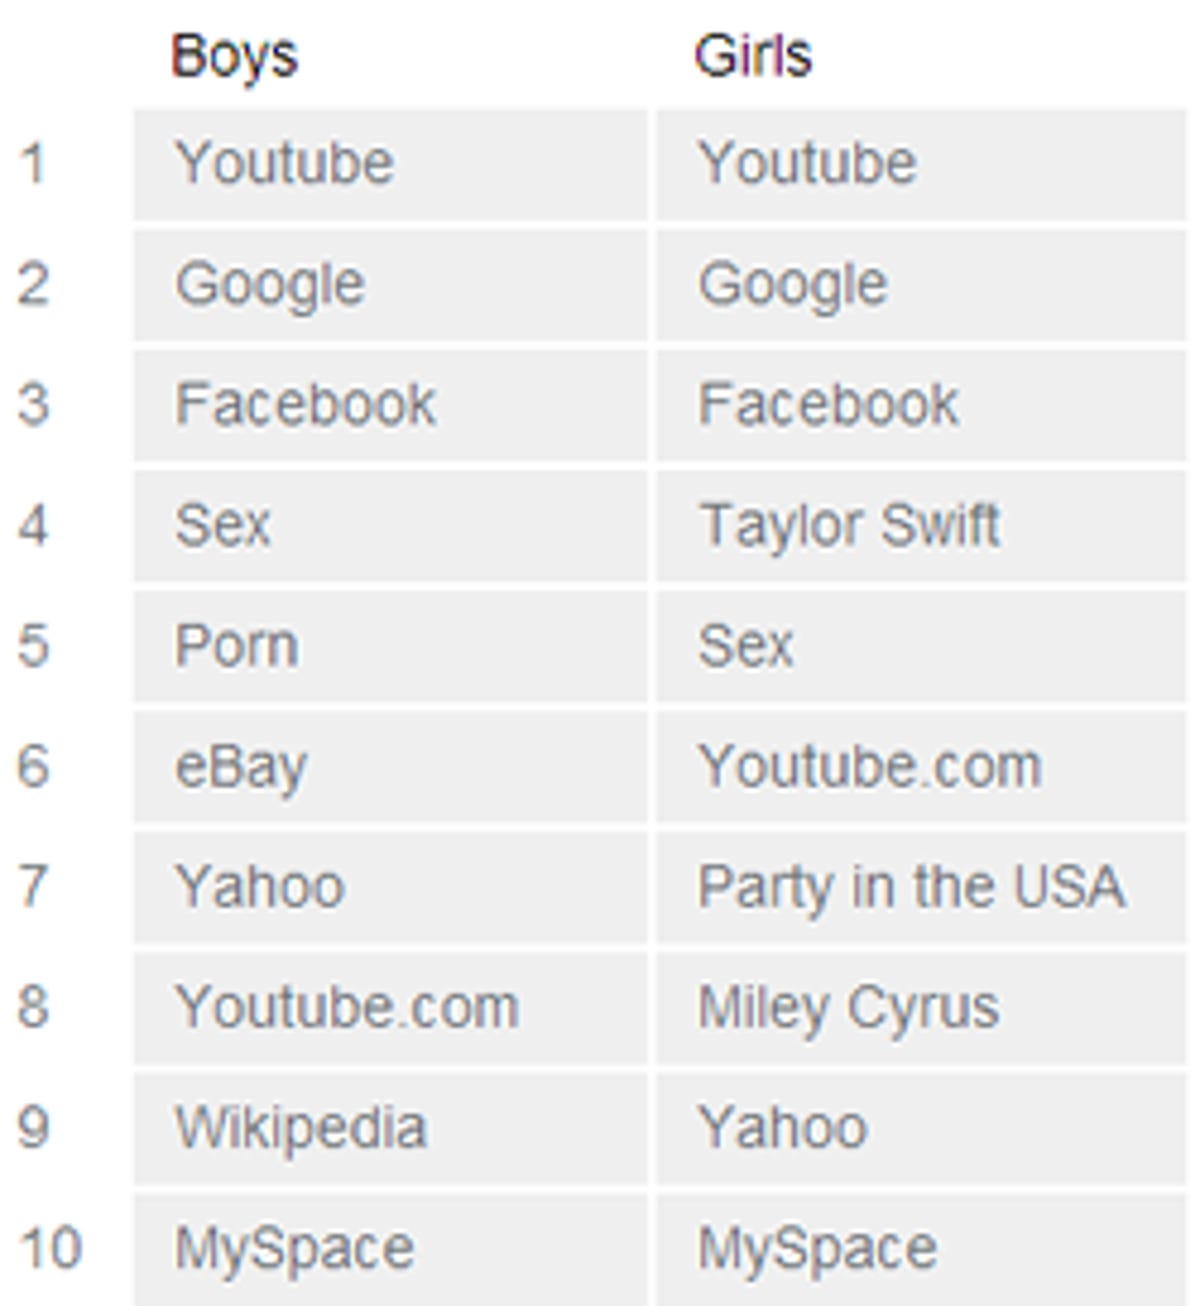 Top ten search terms by boys and girls for 2009